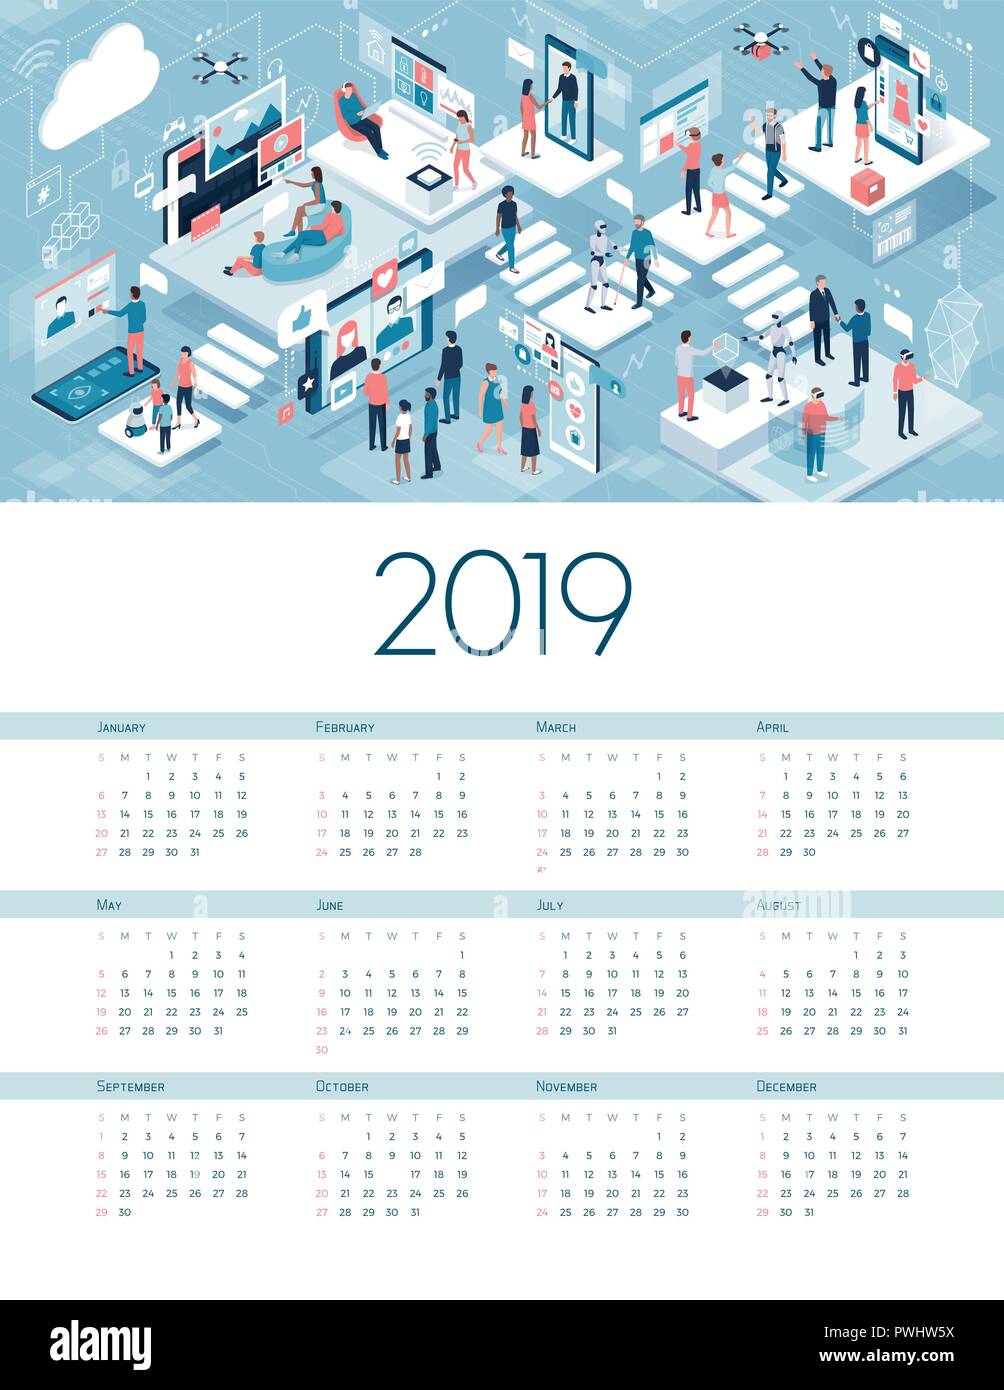 Blockchain of things calendar 2019: connected devices, people and networks Stock Vector